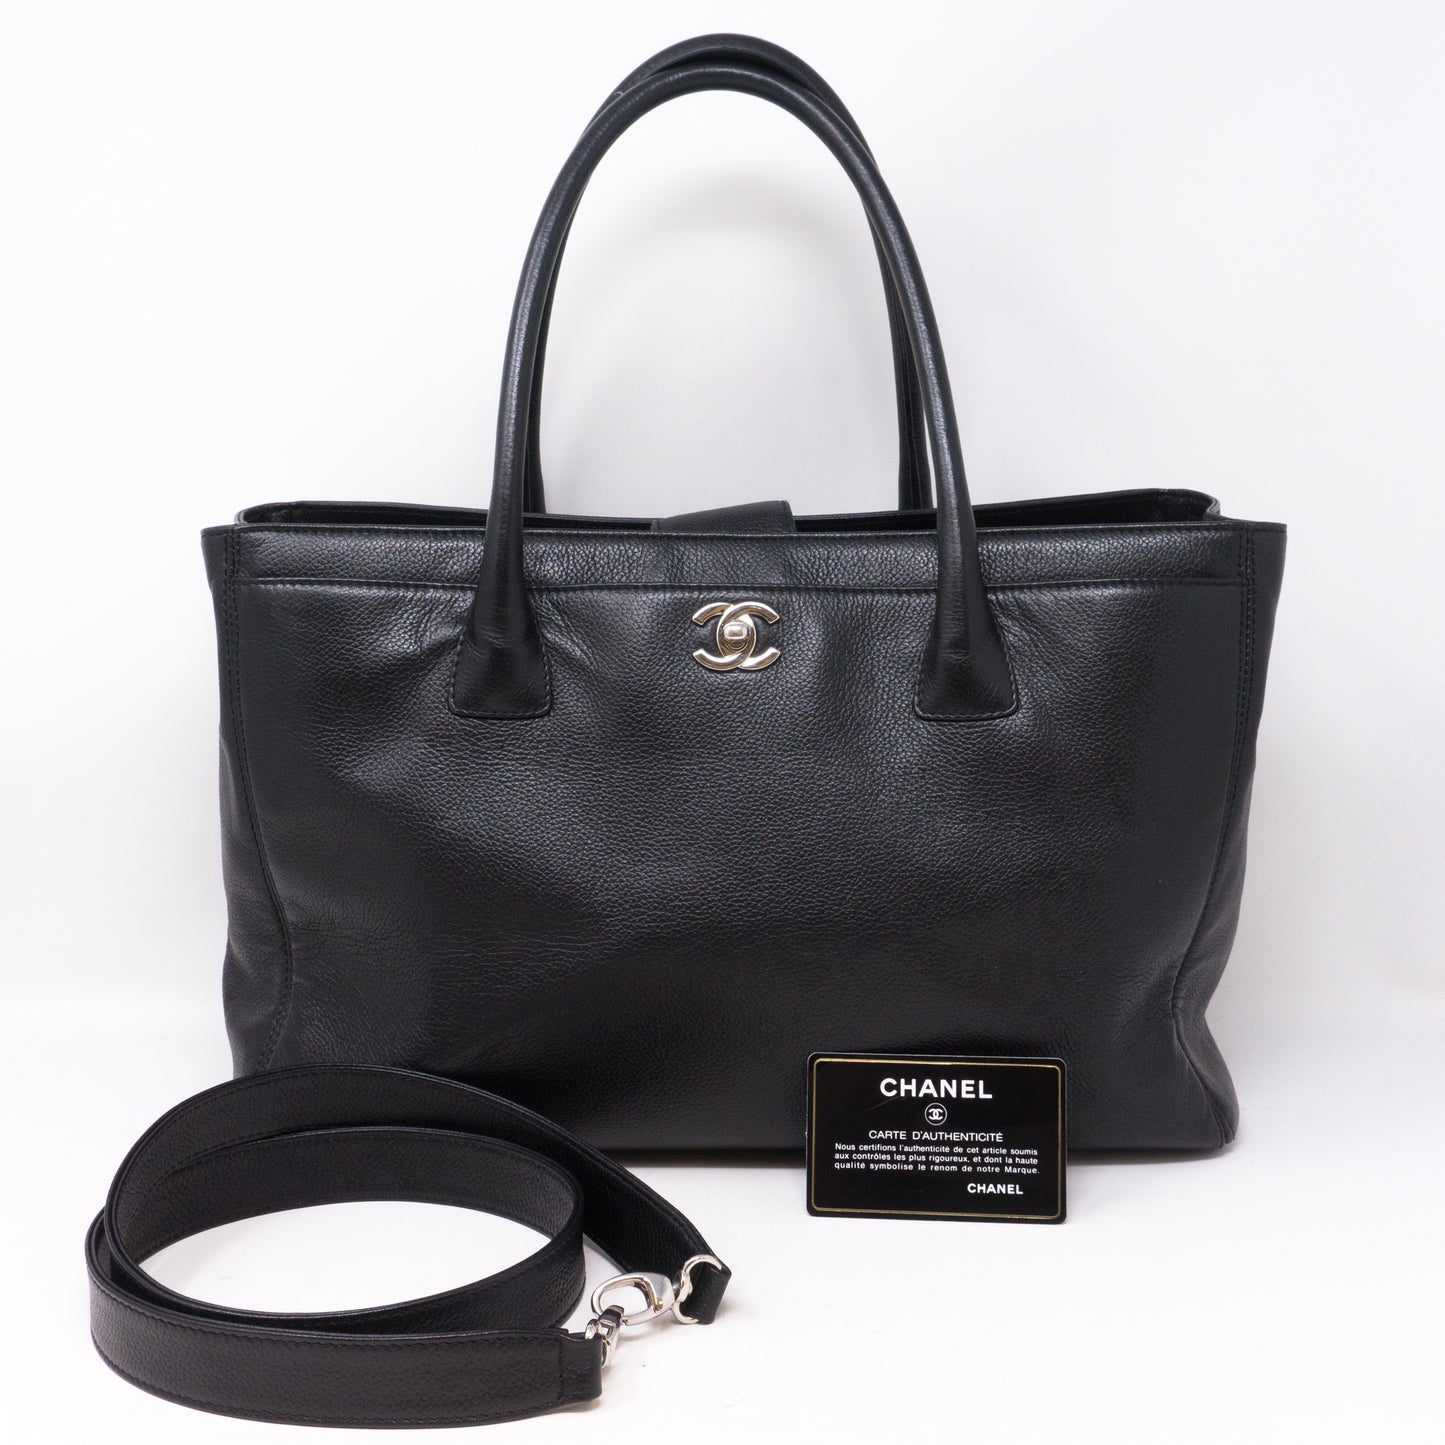 Executive Cerf Black Leather Tote